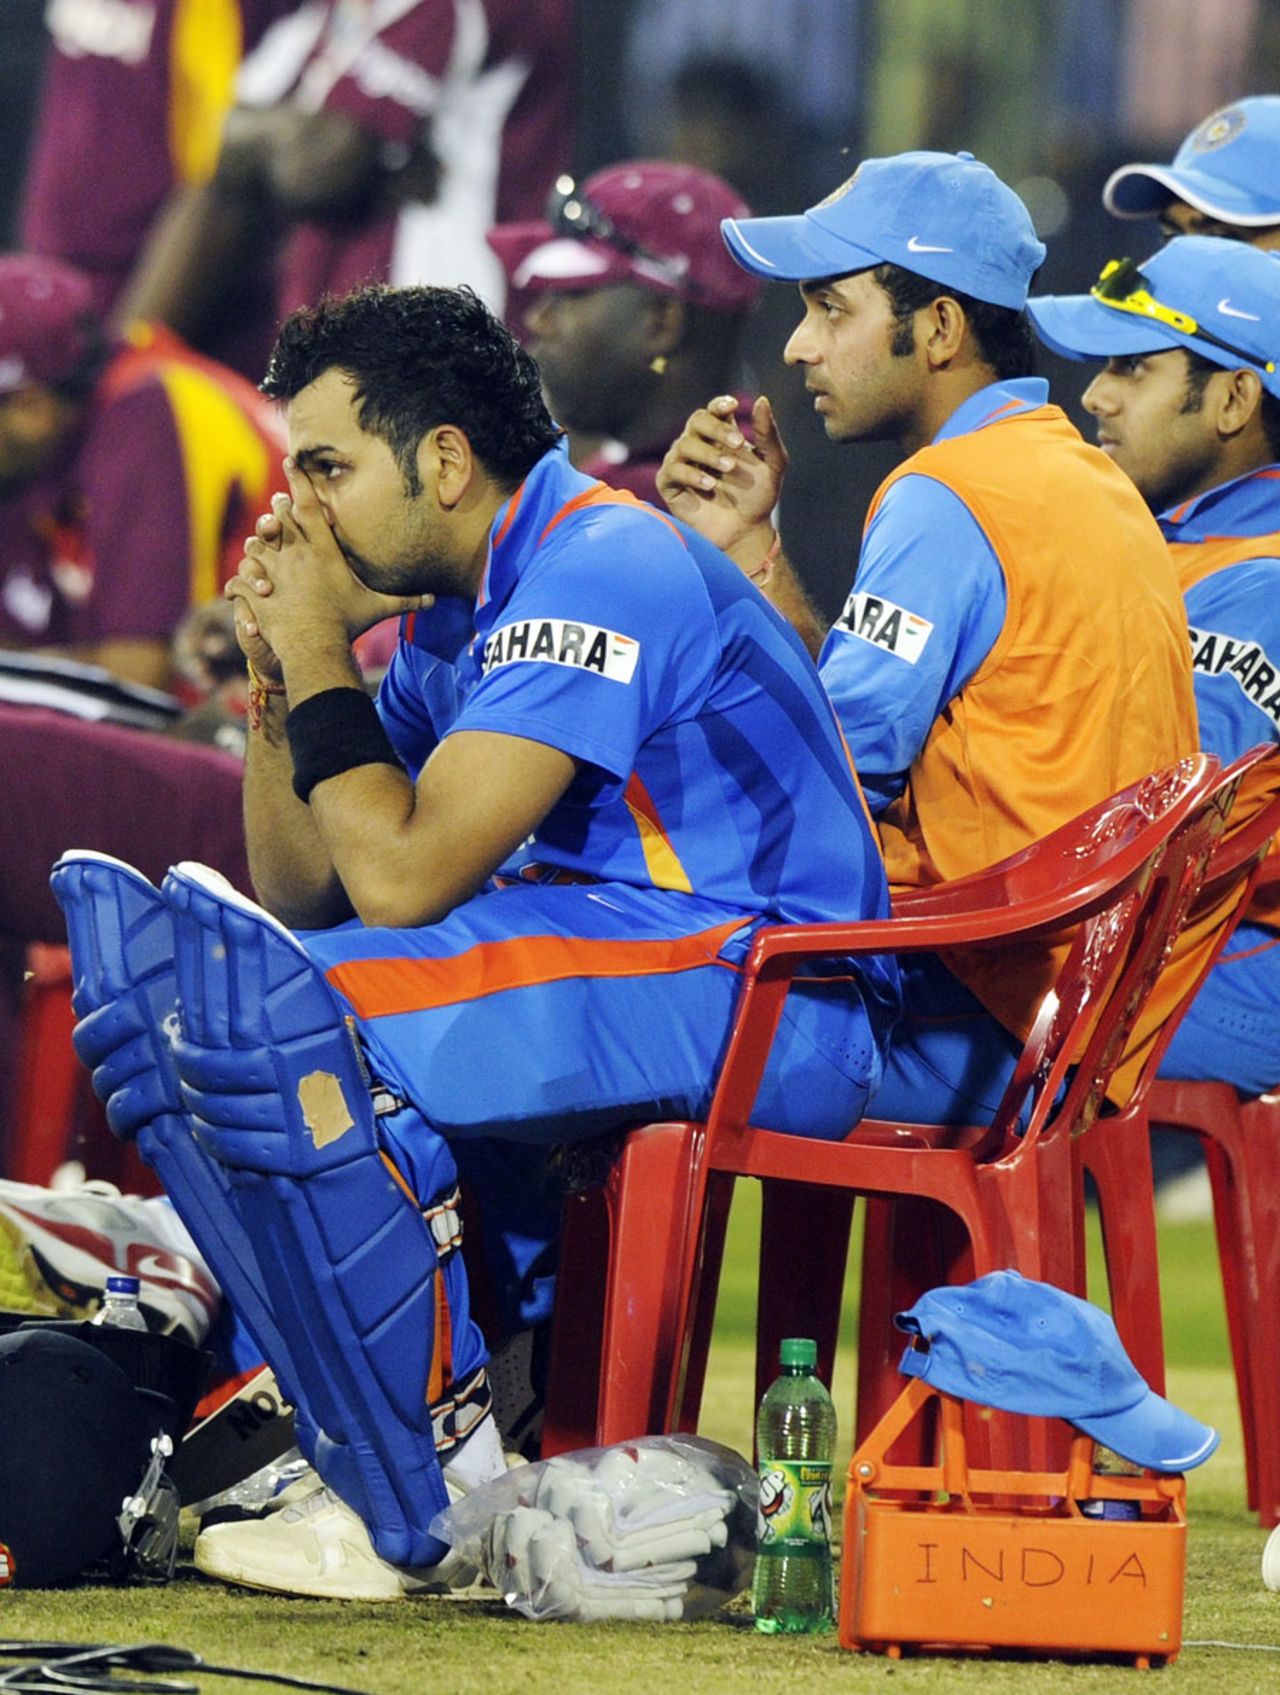 India's players watch the match, as it nears its conclusion, from the sidelines, India v West Indies, 1st ODI, Cuttack, November 29, 2011